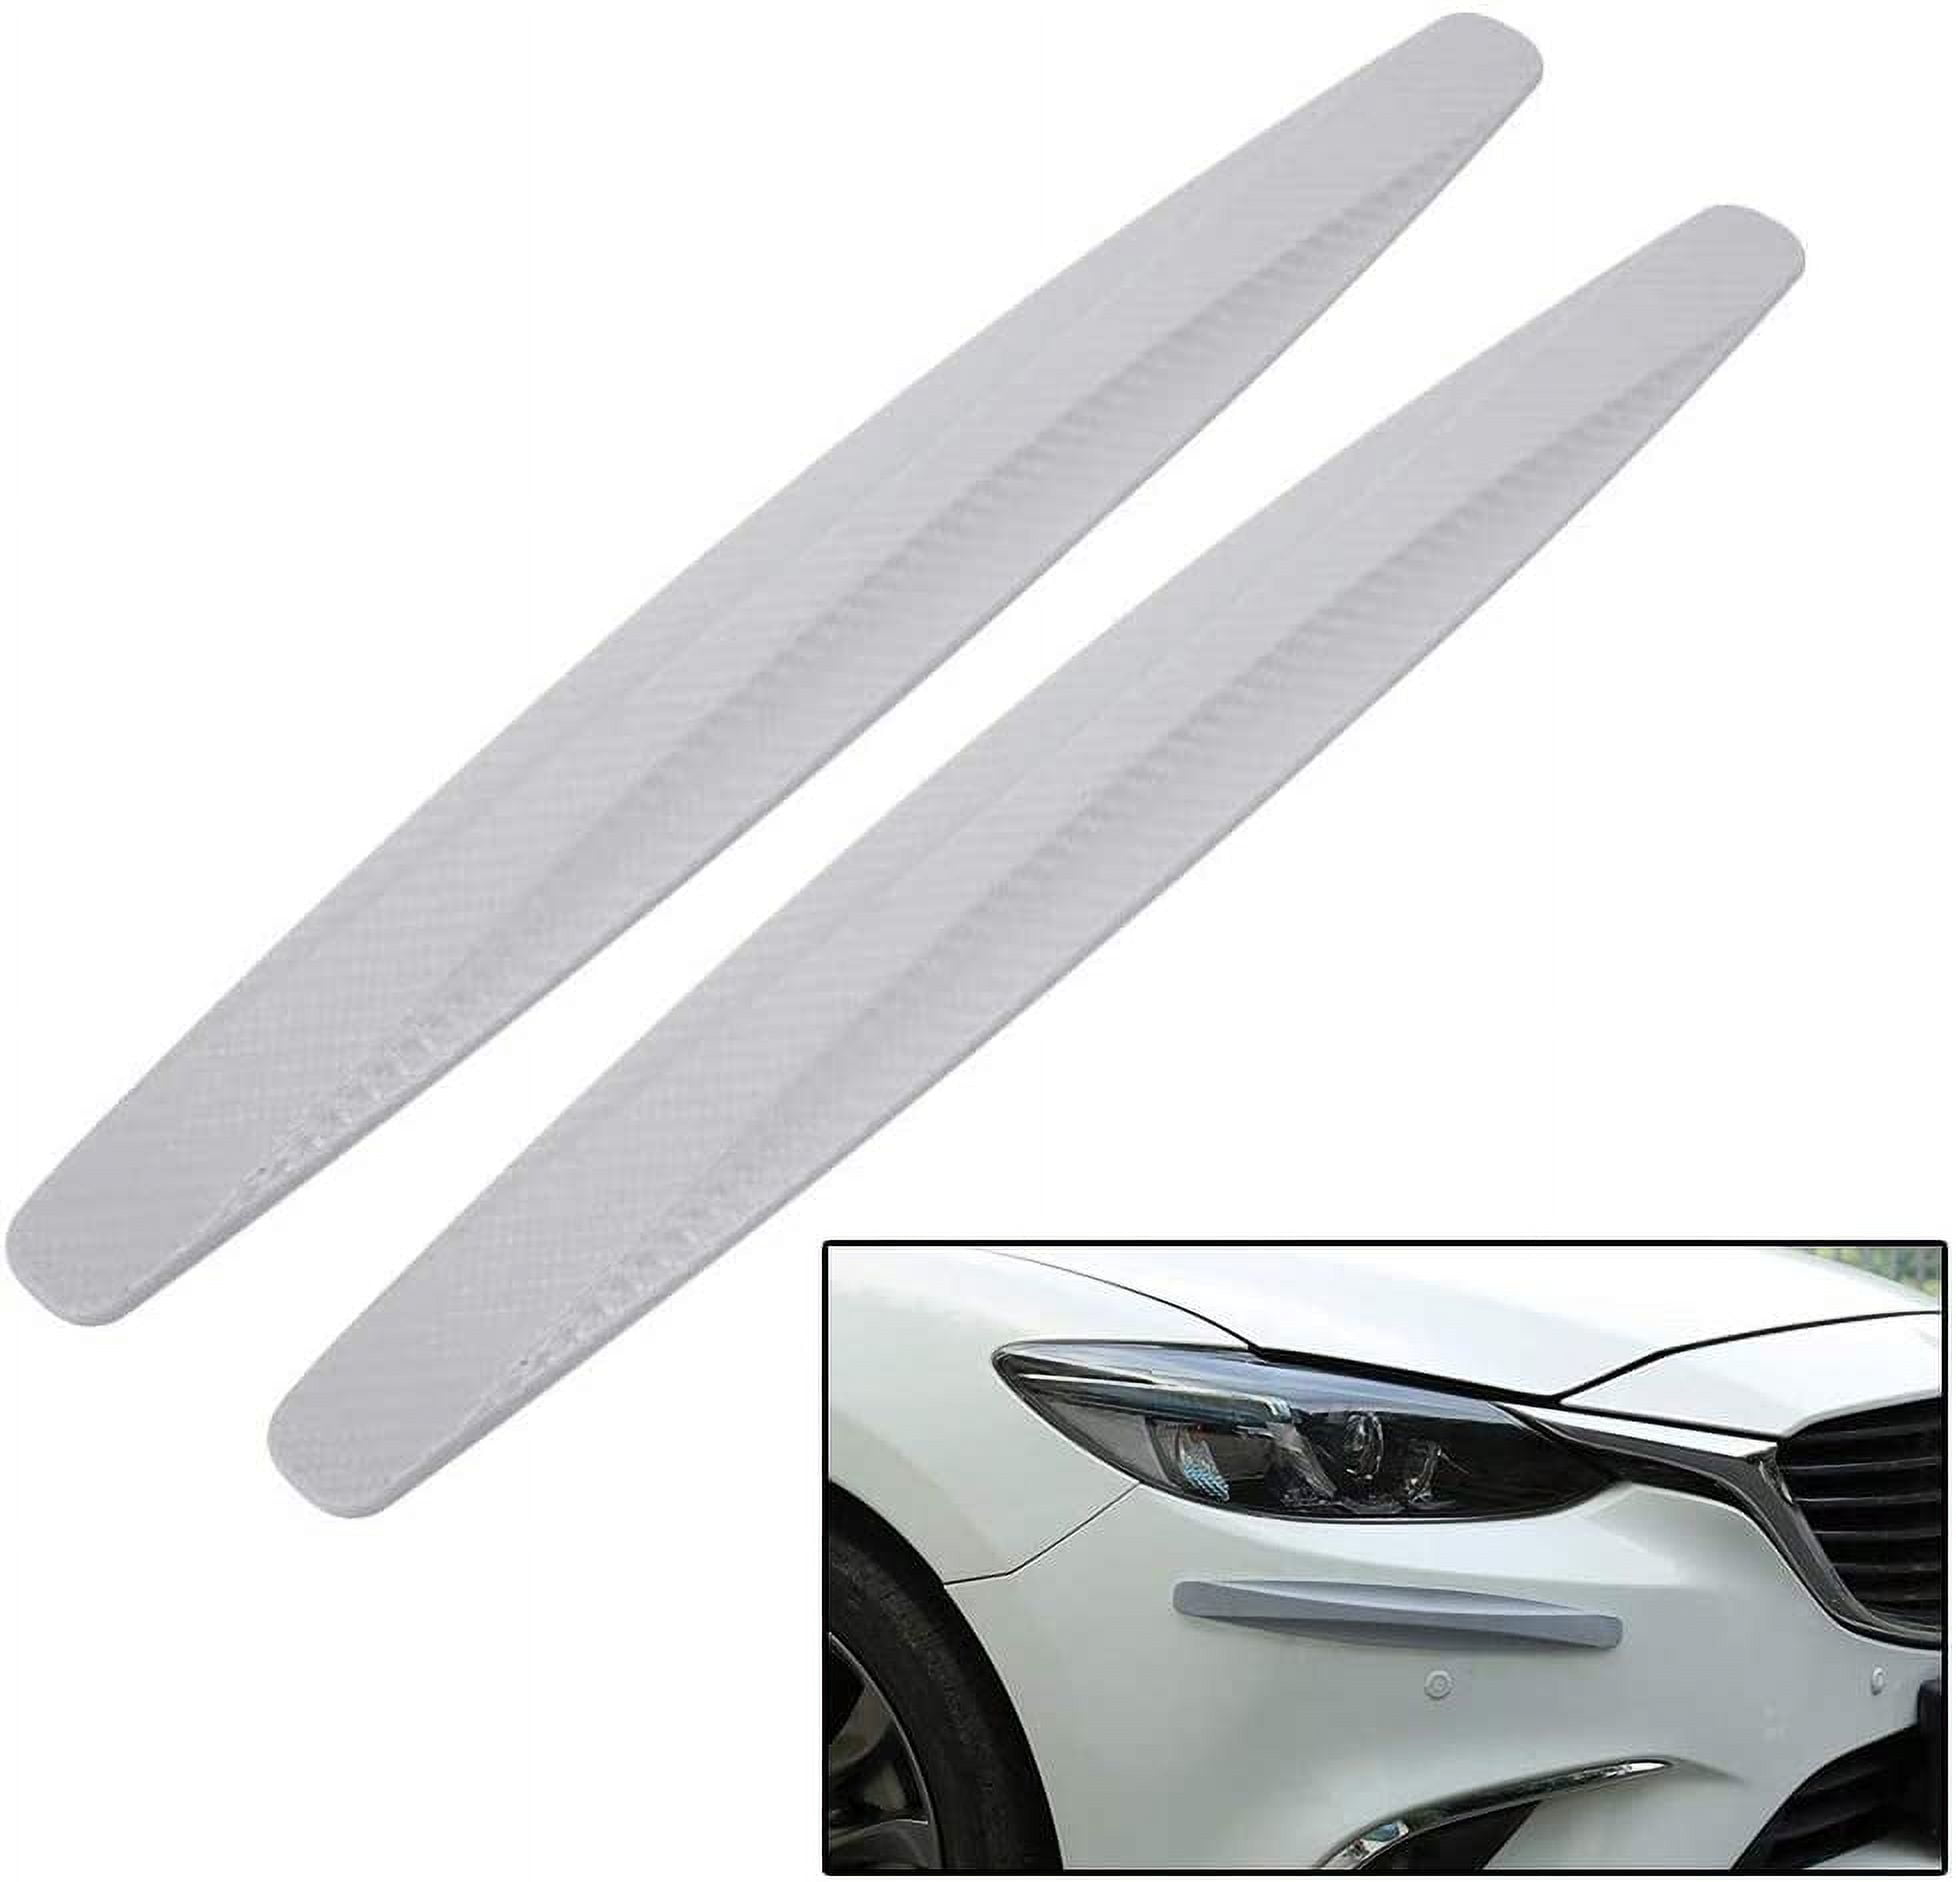 Walbest 2 Pack Car Front Rear Bumper Protector Corner Guard Anti-Collision  Rubber Strips Scratch-Resistant Trim Cover for Cars SUV Pickup Trucks  (Grey) 